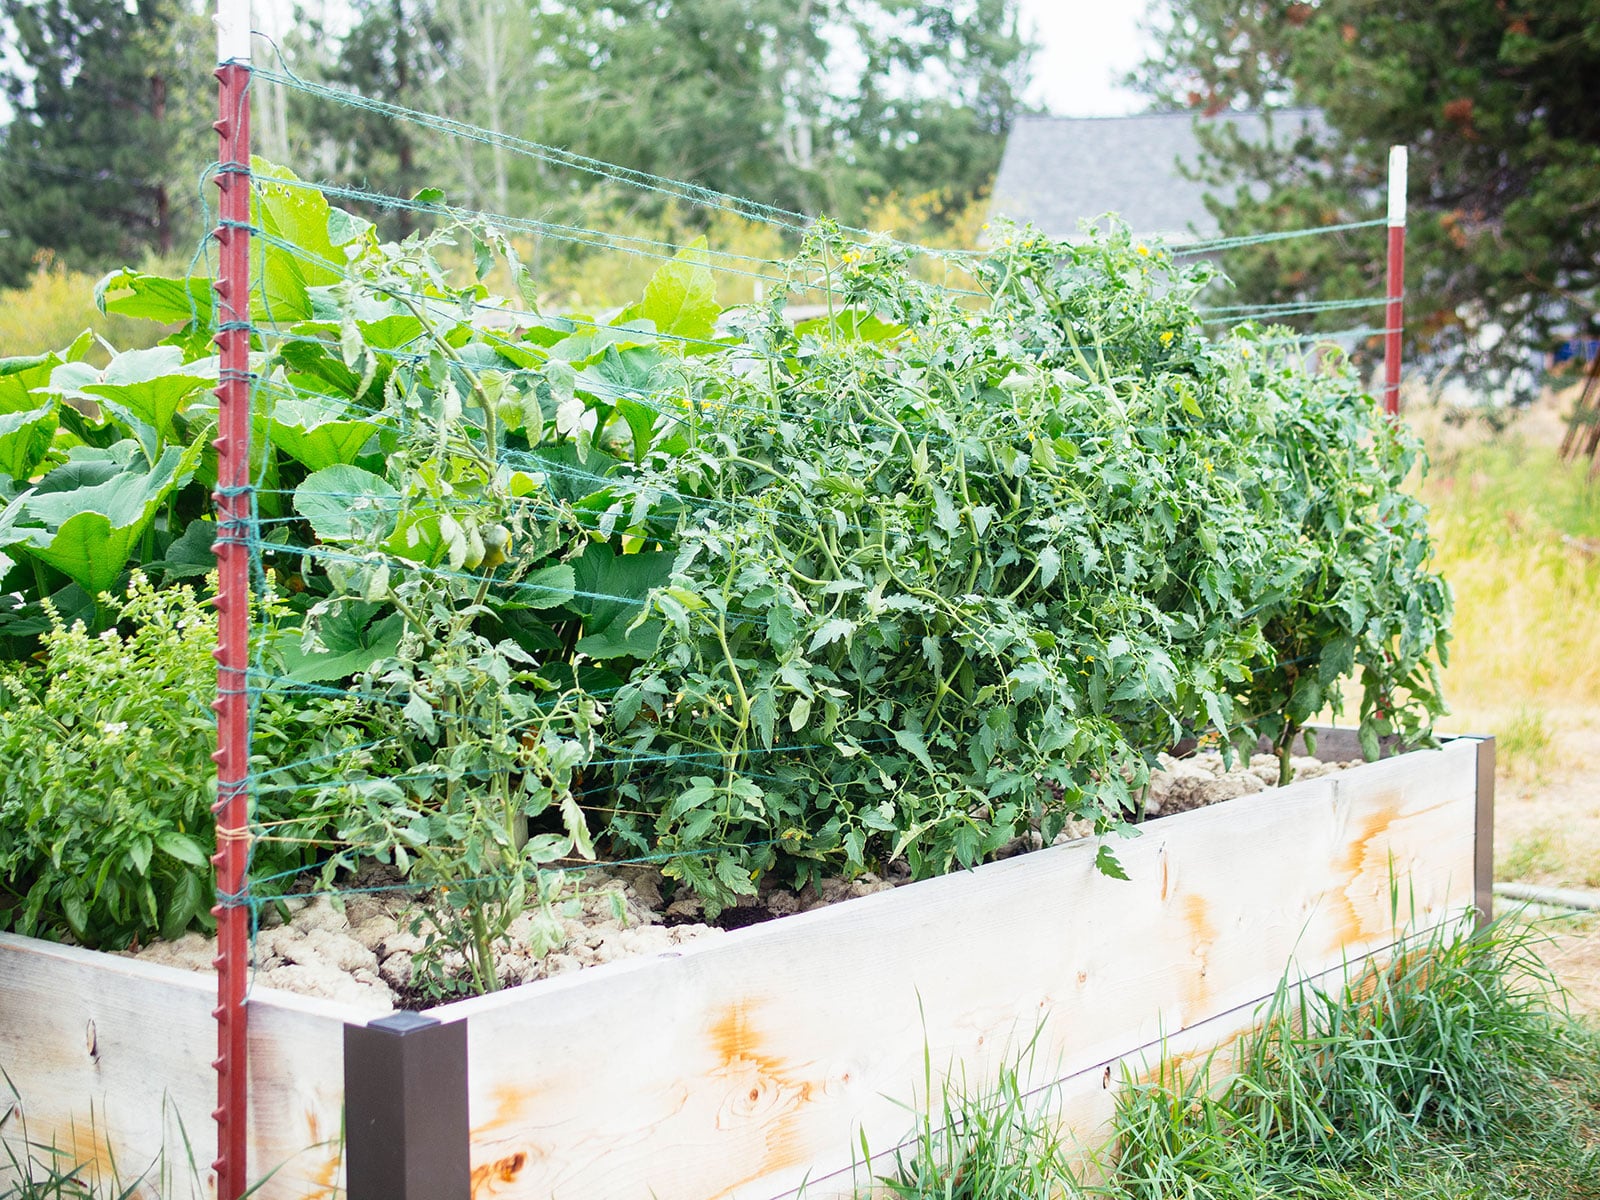 Young tomato plants in a raised bed being supported by fence T-posts and twine